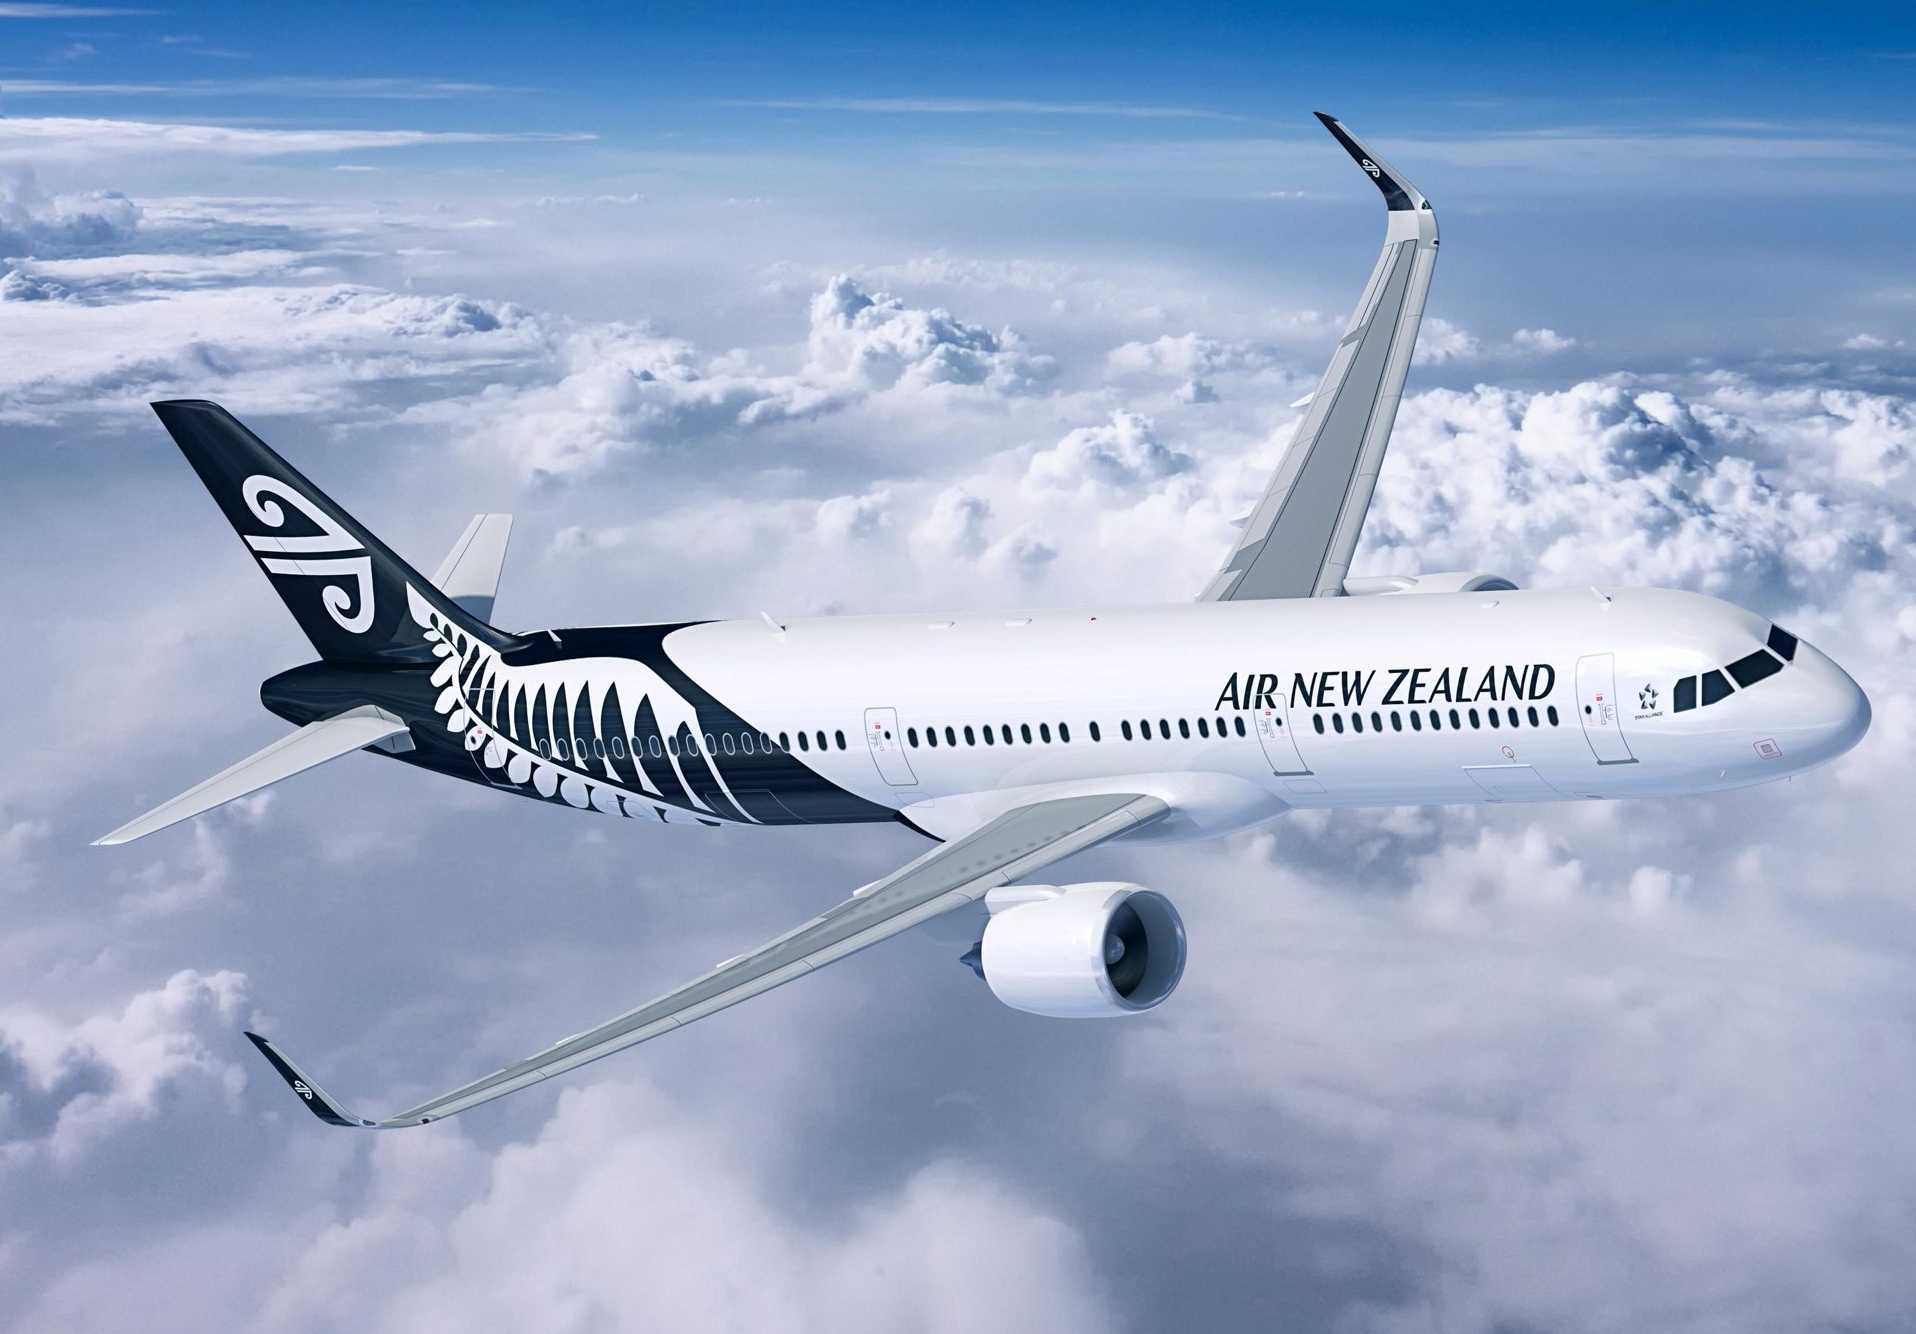 Next month, Air New Zealand will begin construction on a new, much larger regional lounge at Auckland Airport, as part of a $60 million investment in lounges throughout New Zealand over the next two years. The lounge will cater for up to 265 customers, offering more than three times the seating of the current regional lounge. Click to enlarge.